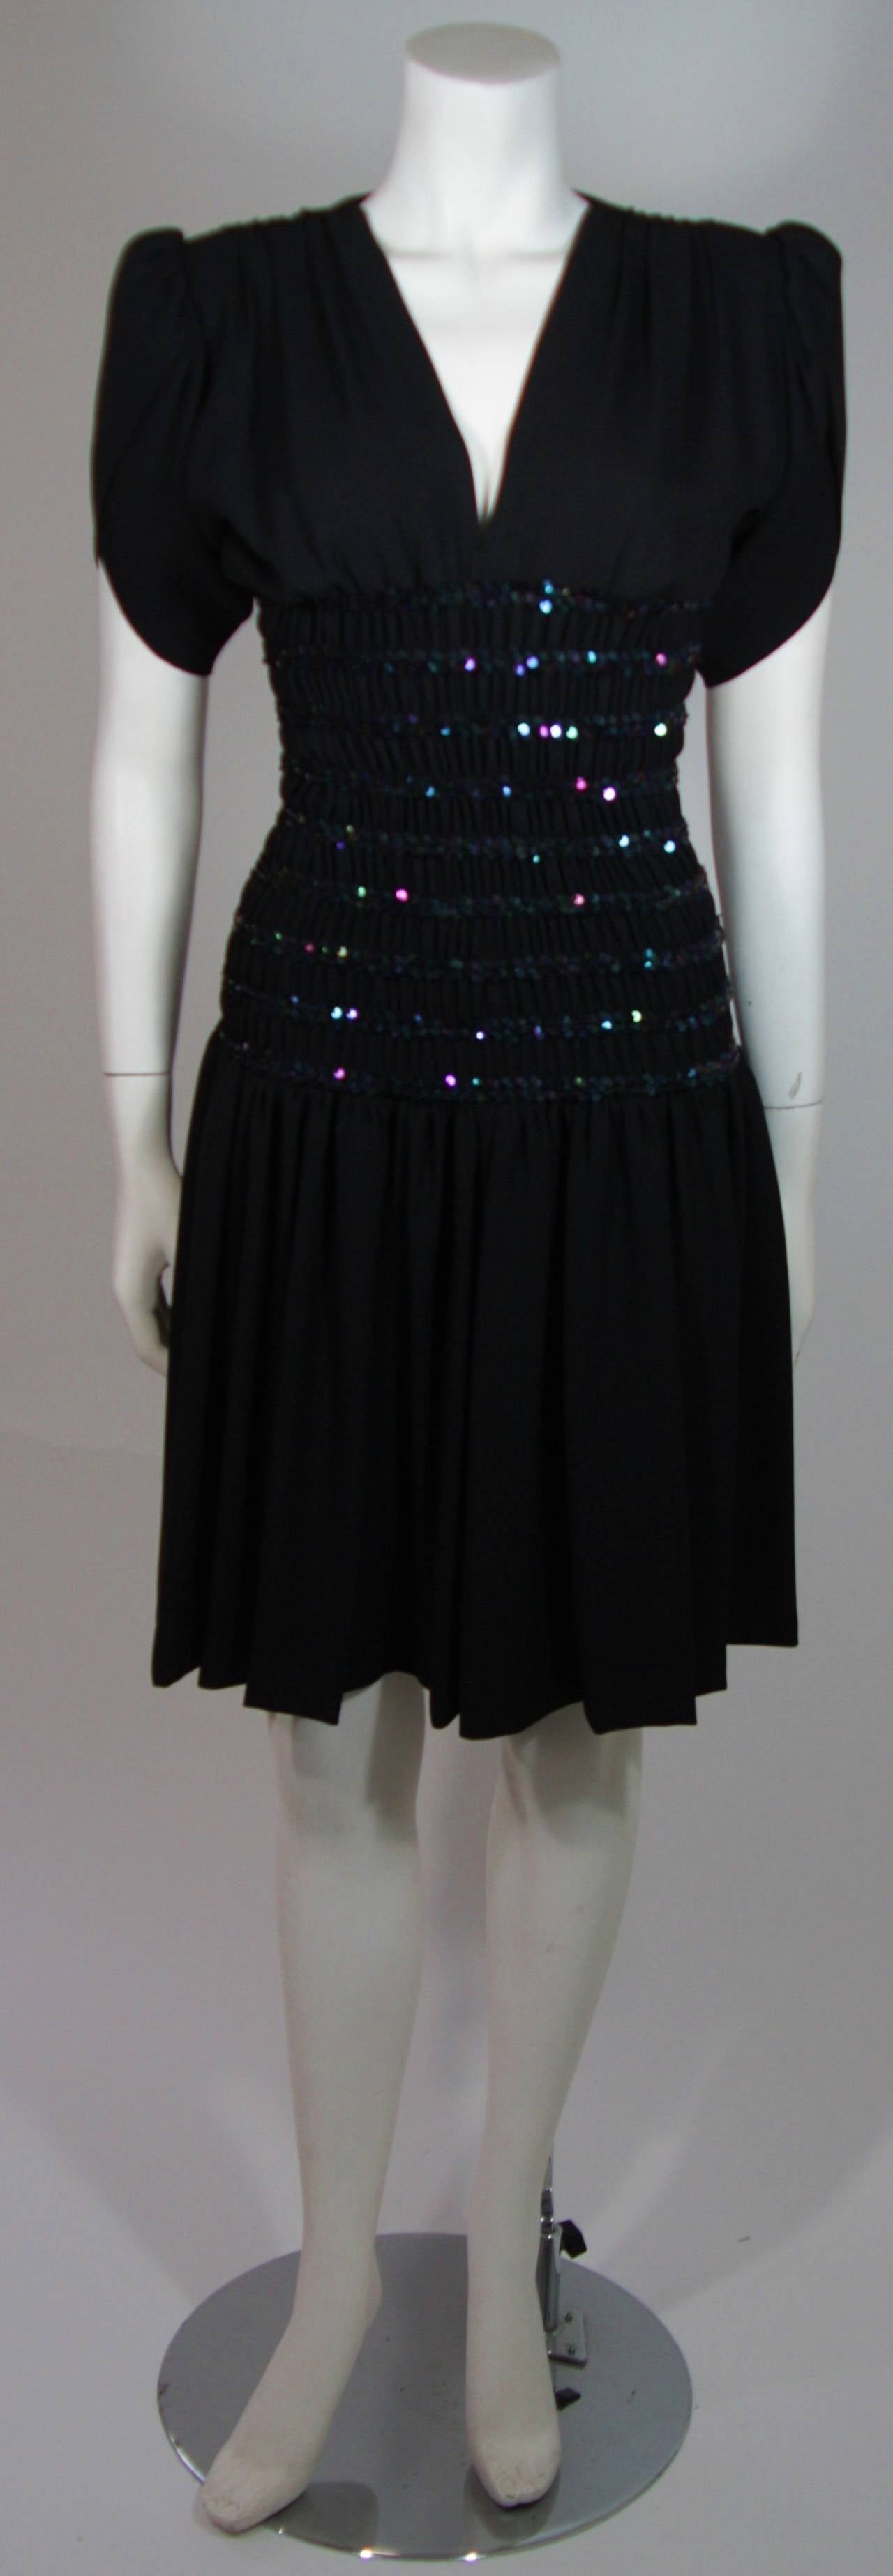 This Yves Saint Laurent cocktail dress is composed of a black crepe and features a smocked waistline with iridescent navy sequins. The sleeves are a drape style and there are gathers at the shoulders. Pull over style. Made in France.  

**Please